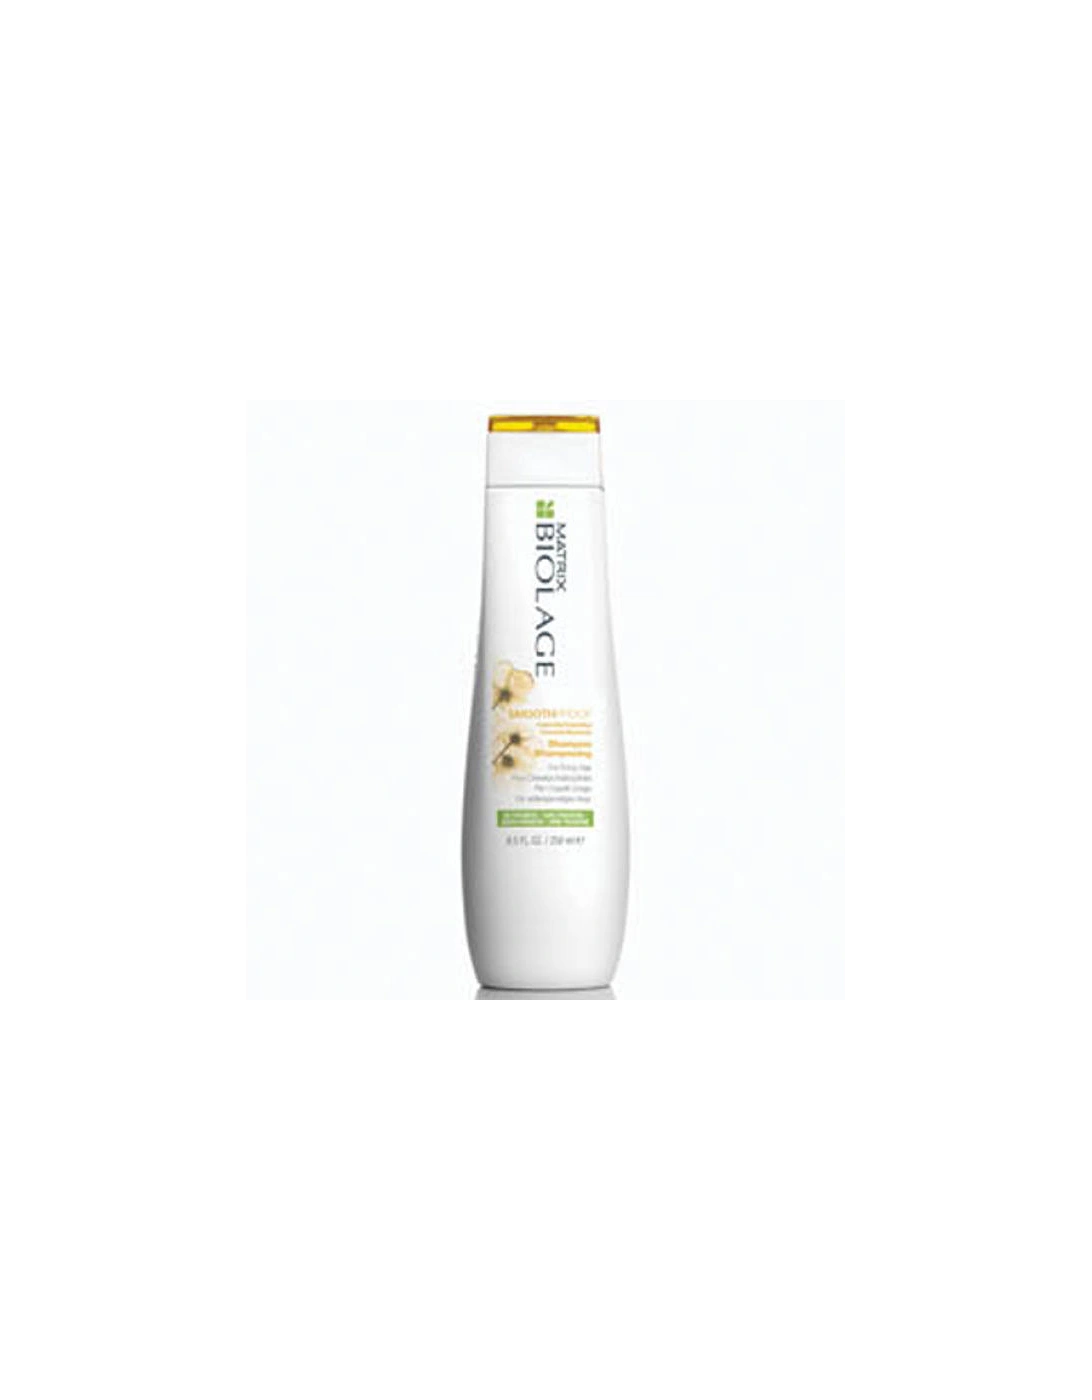 SmoothProof Shampoo for Smoothing Frizzy Hair 200ml - Biolage, 2 of 1